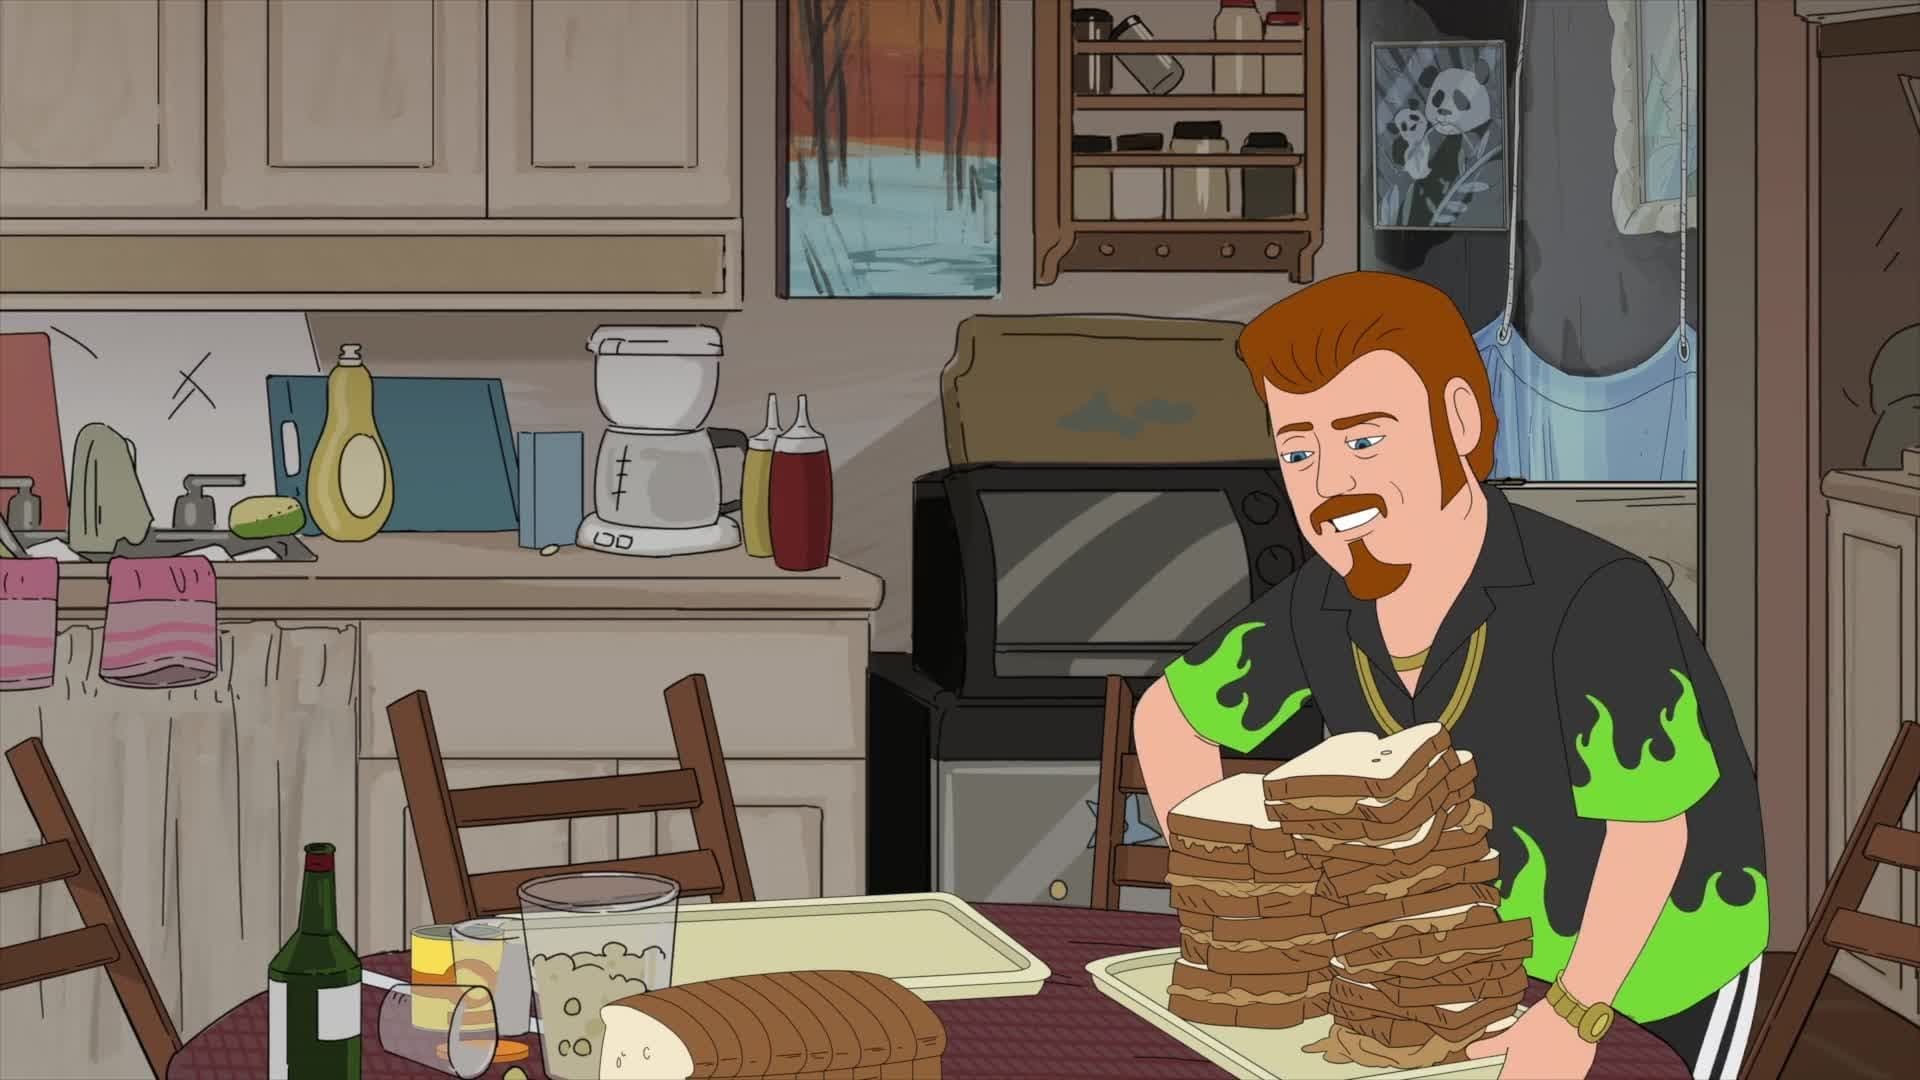 Trailer Park Boys: The Animated Series background